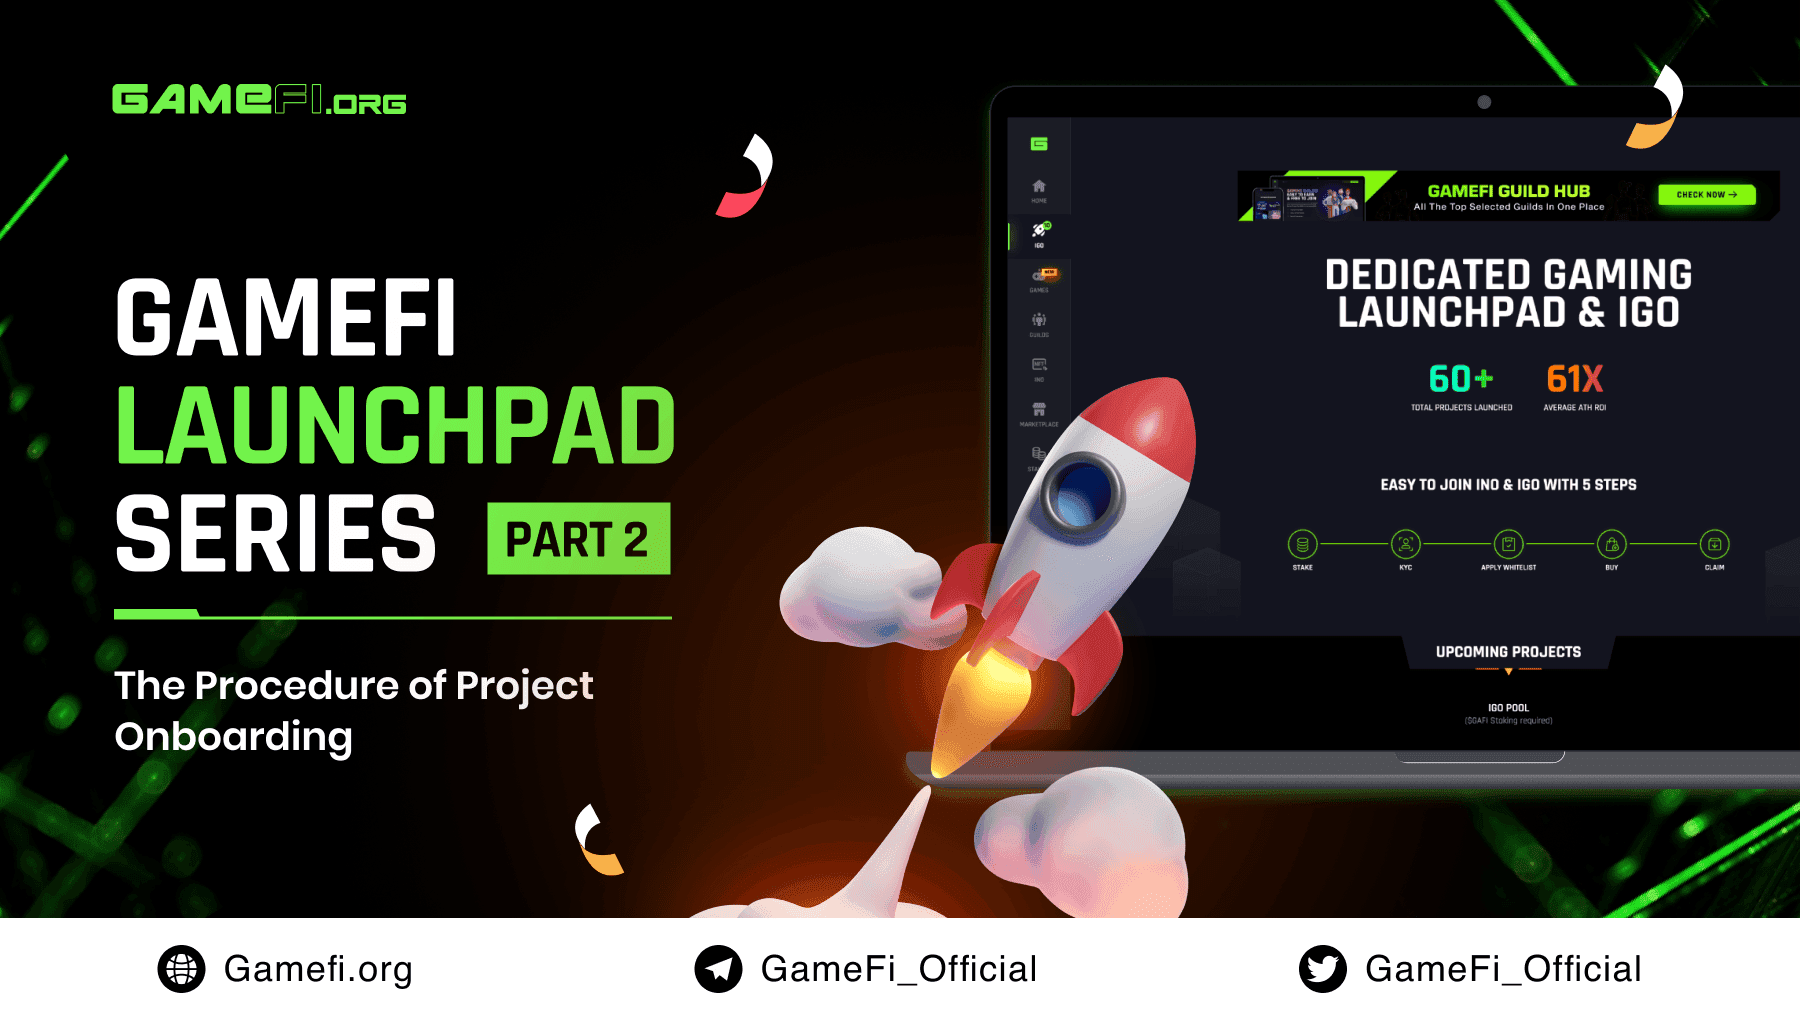 GameFi Launchpad Series - Part 2: The Procedure of Project Onboarding